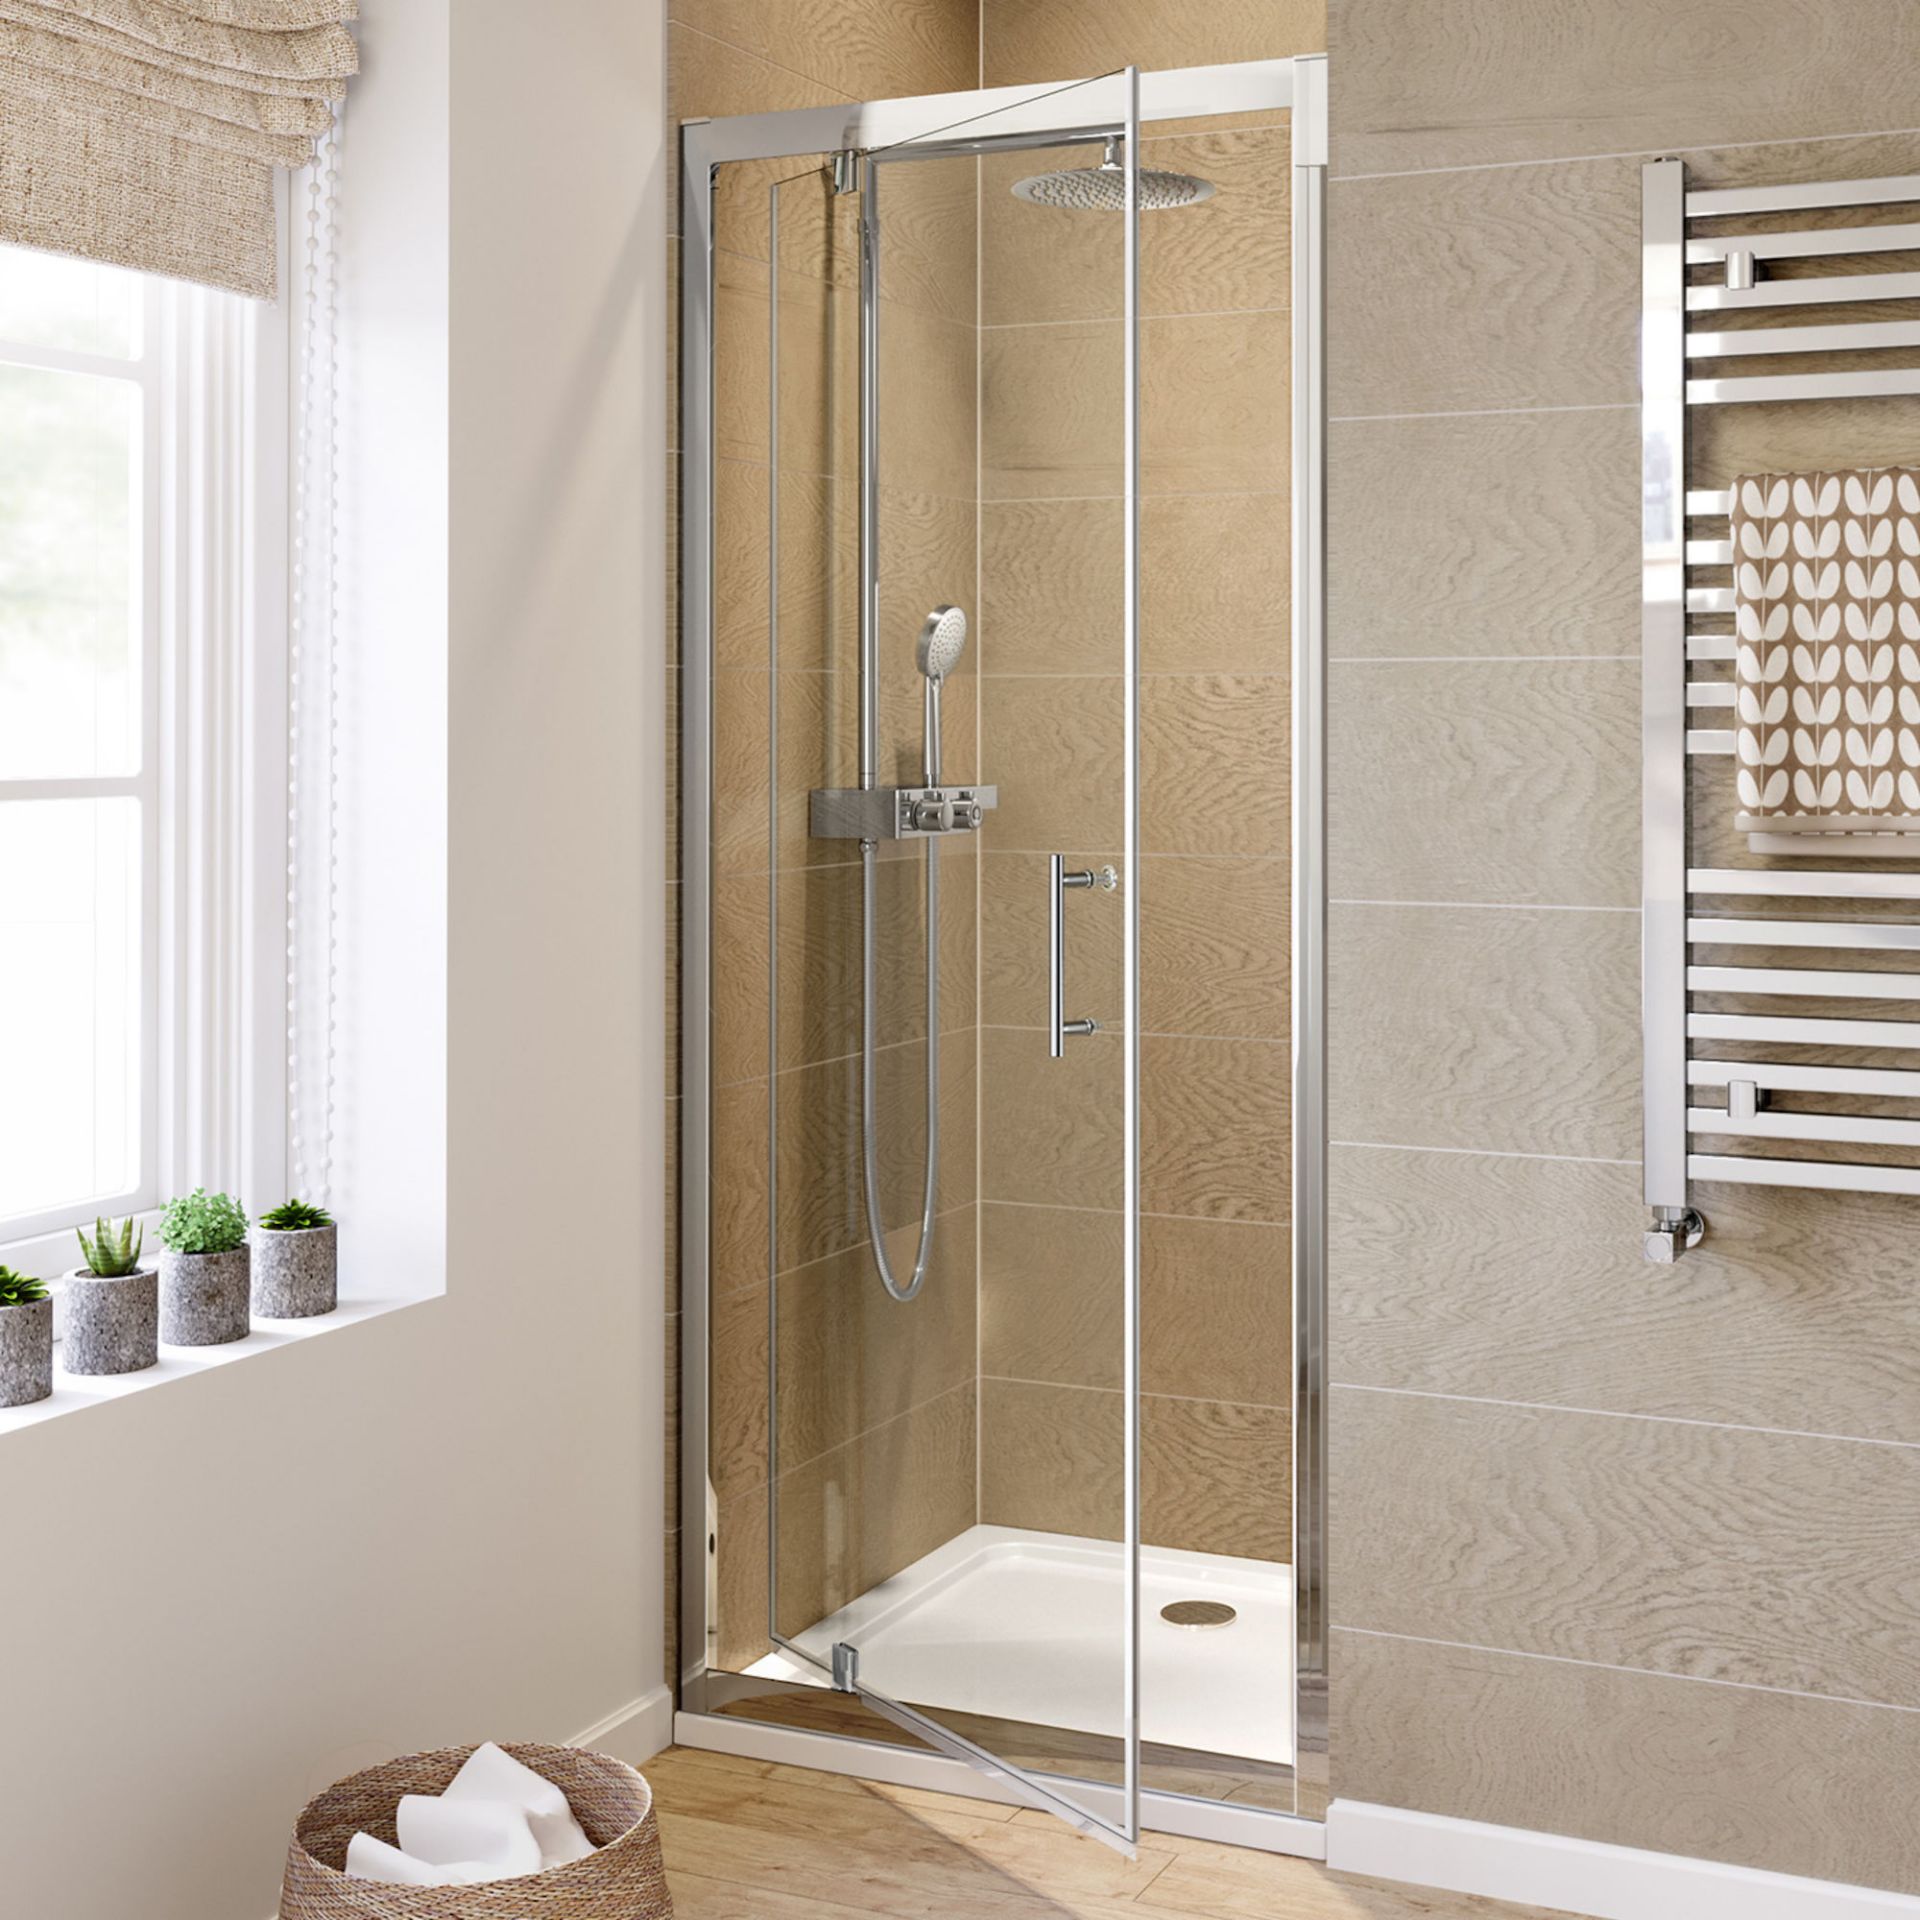 Brand New Twyfords 700mm - 6mm - Premium Pivot Shower Door. RRP £299.99. 8mm Safety Glass Fully wate